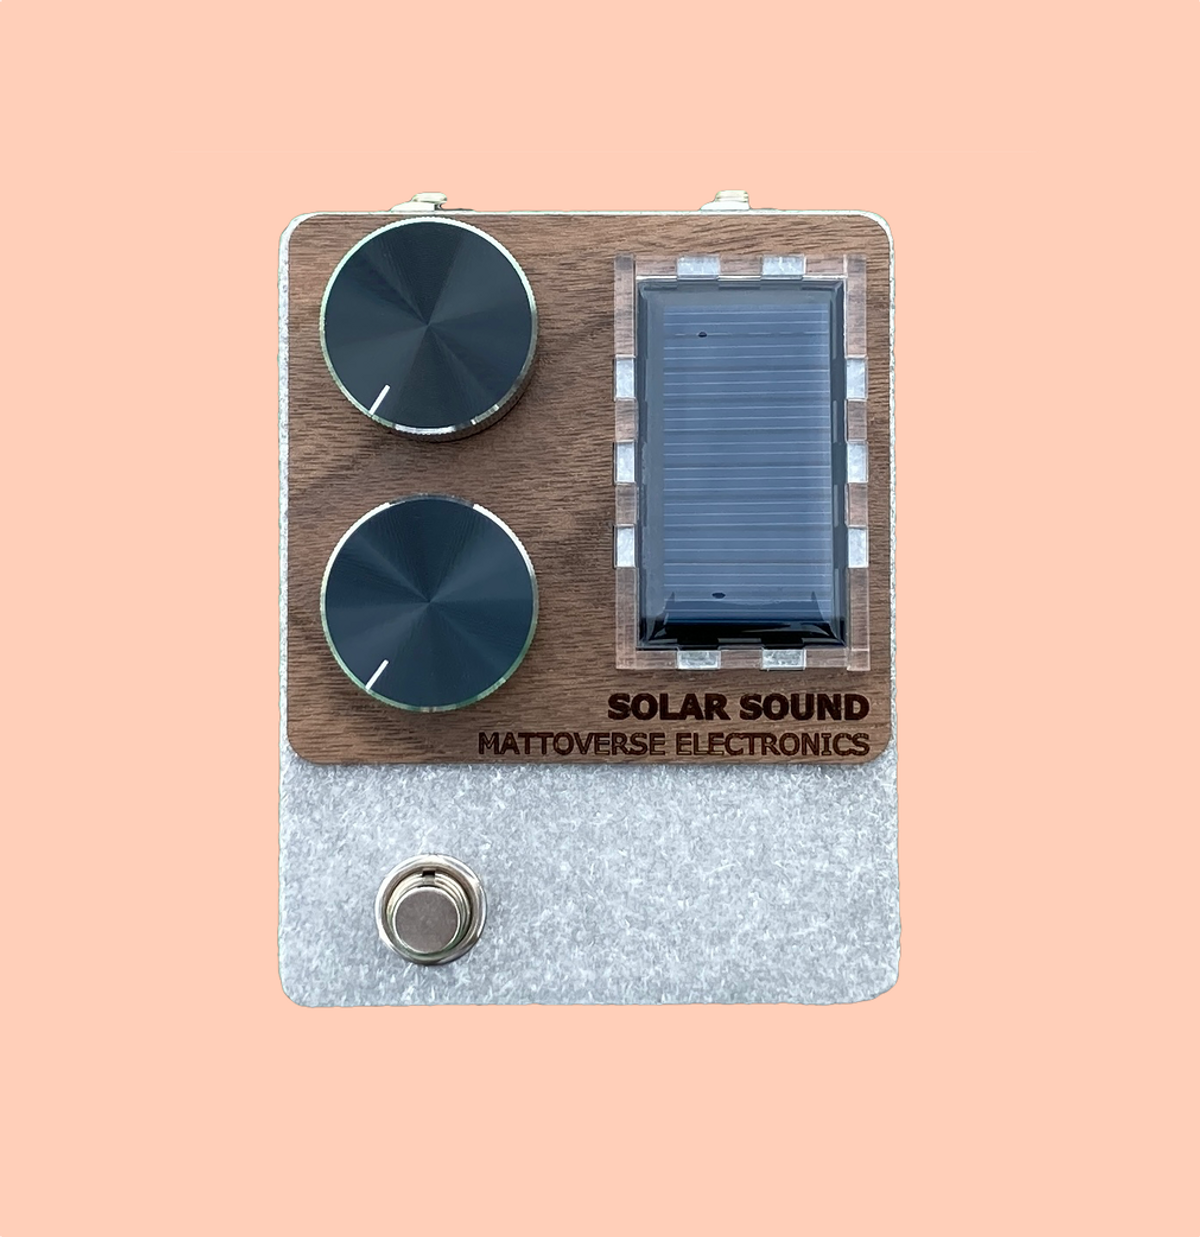 Mattoverse Electronics Releases the Solar Sound